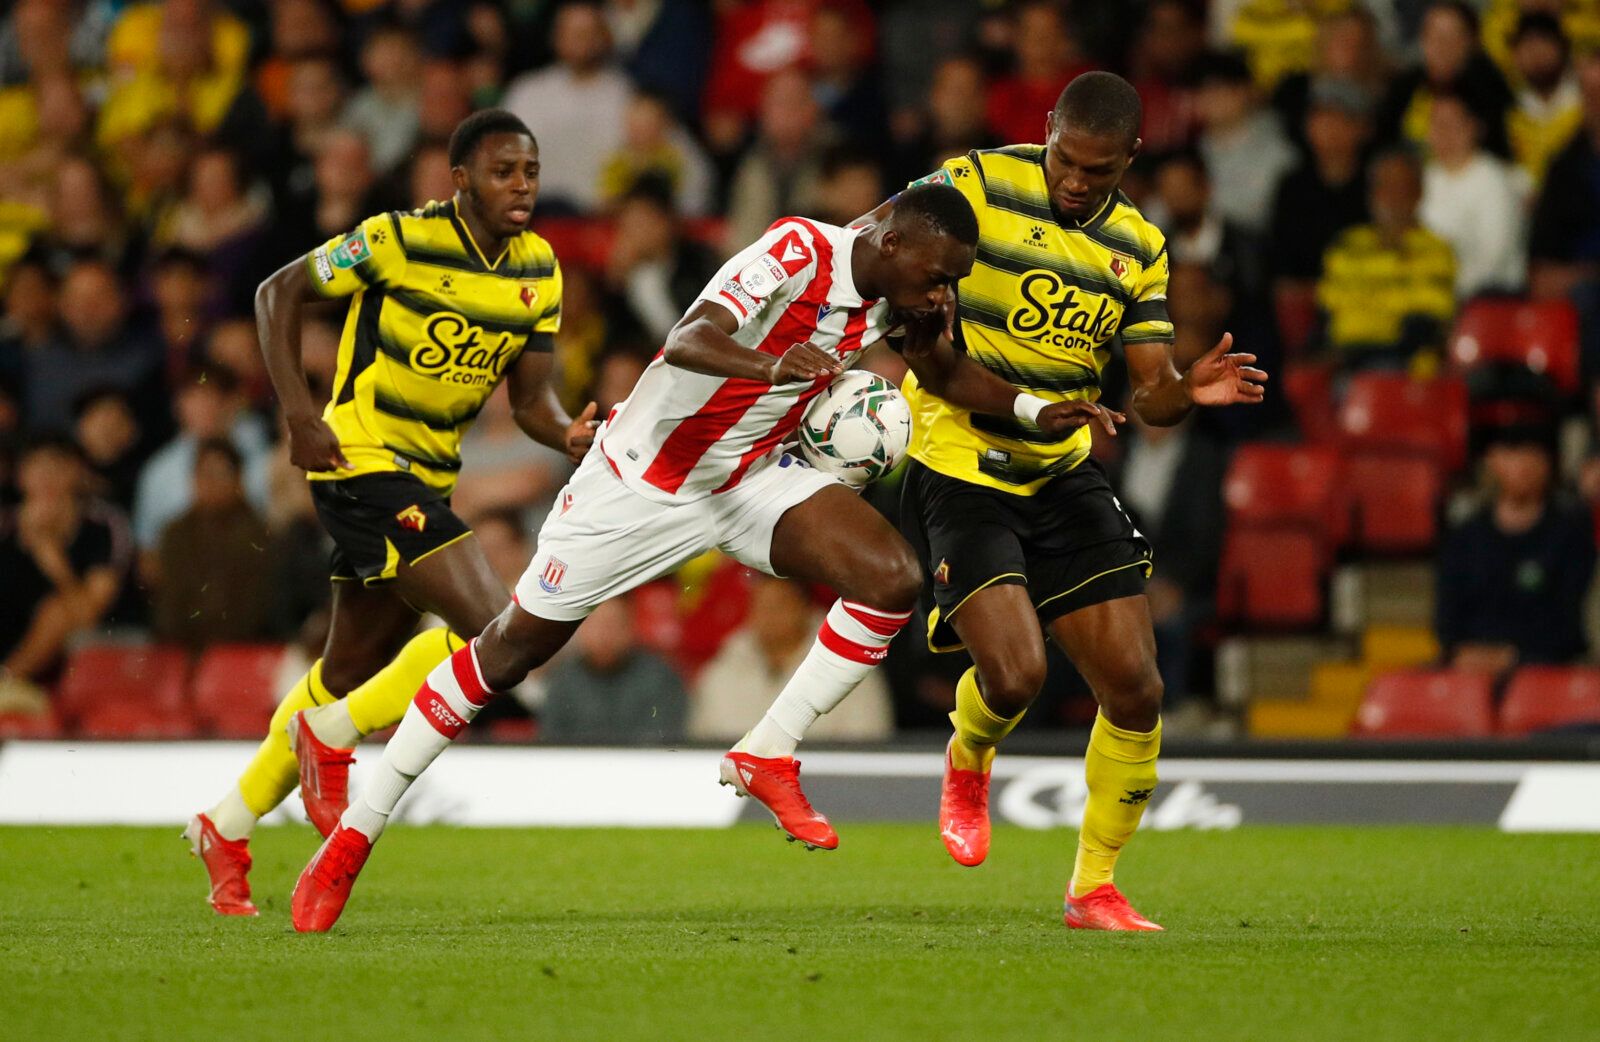 Soccer Football - Carabao Cup - Third Round - Watford v Stoke City - Vicarage Road, Watford, Britain - September 21, 2021 Watford's Christian Kabasele in action with Stoke's Abdallah Sima Action Images via Reuters/Andrew Boyers EDITORIAL USE ONLY. No use with unauthorized audio, video, data, fixture lists, club/league logos or 'live' services. Online in-match use limited to 75 images, no video emulation. No use in betting, games or single club /league/player publications.  Please contact your ac